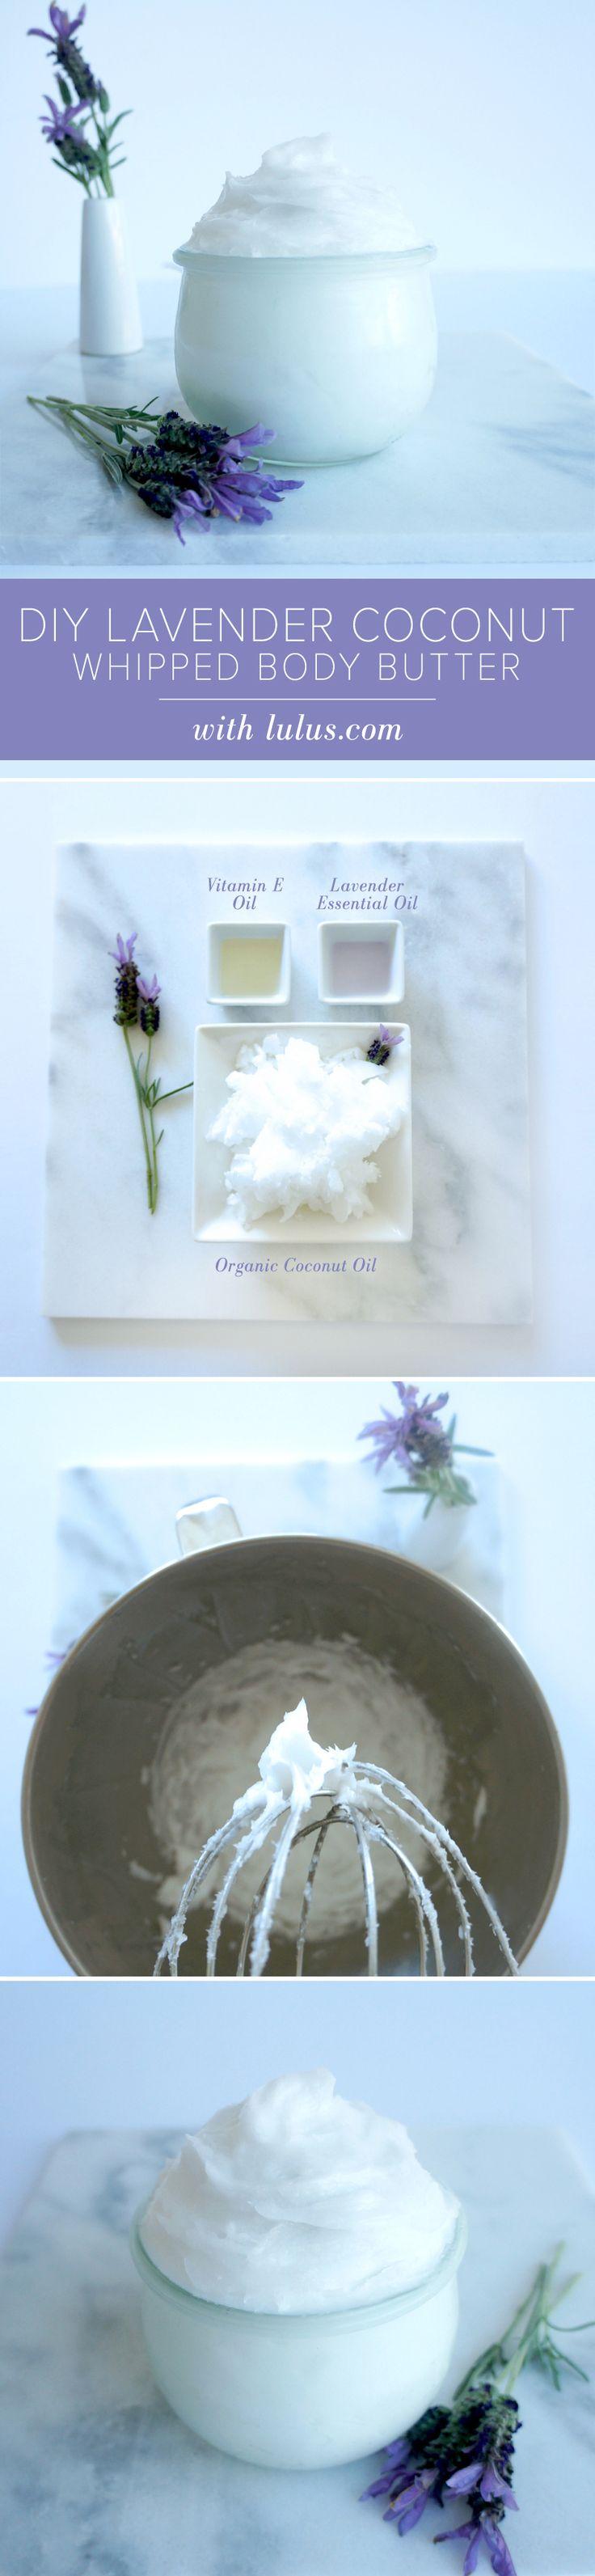 Hochzeit - DIY Lavender Coconut Whipped Body Butter